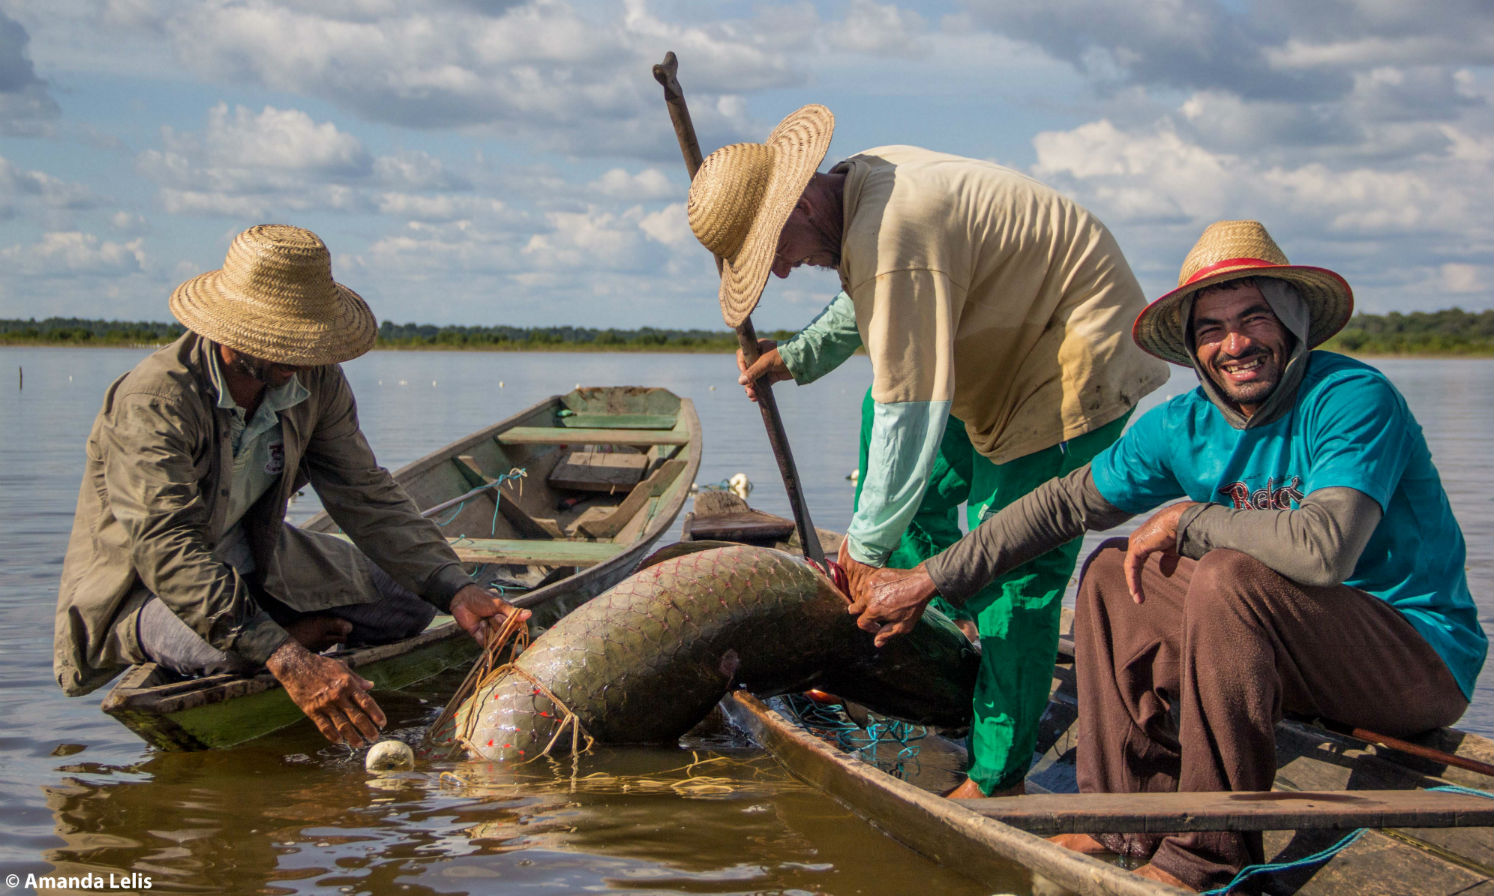 This is how riverside communities and researchers changed public policy in favor of sustainable fishing in the Brazilian Amazon.